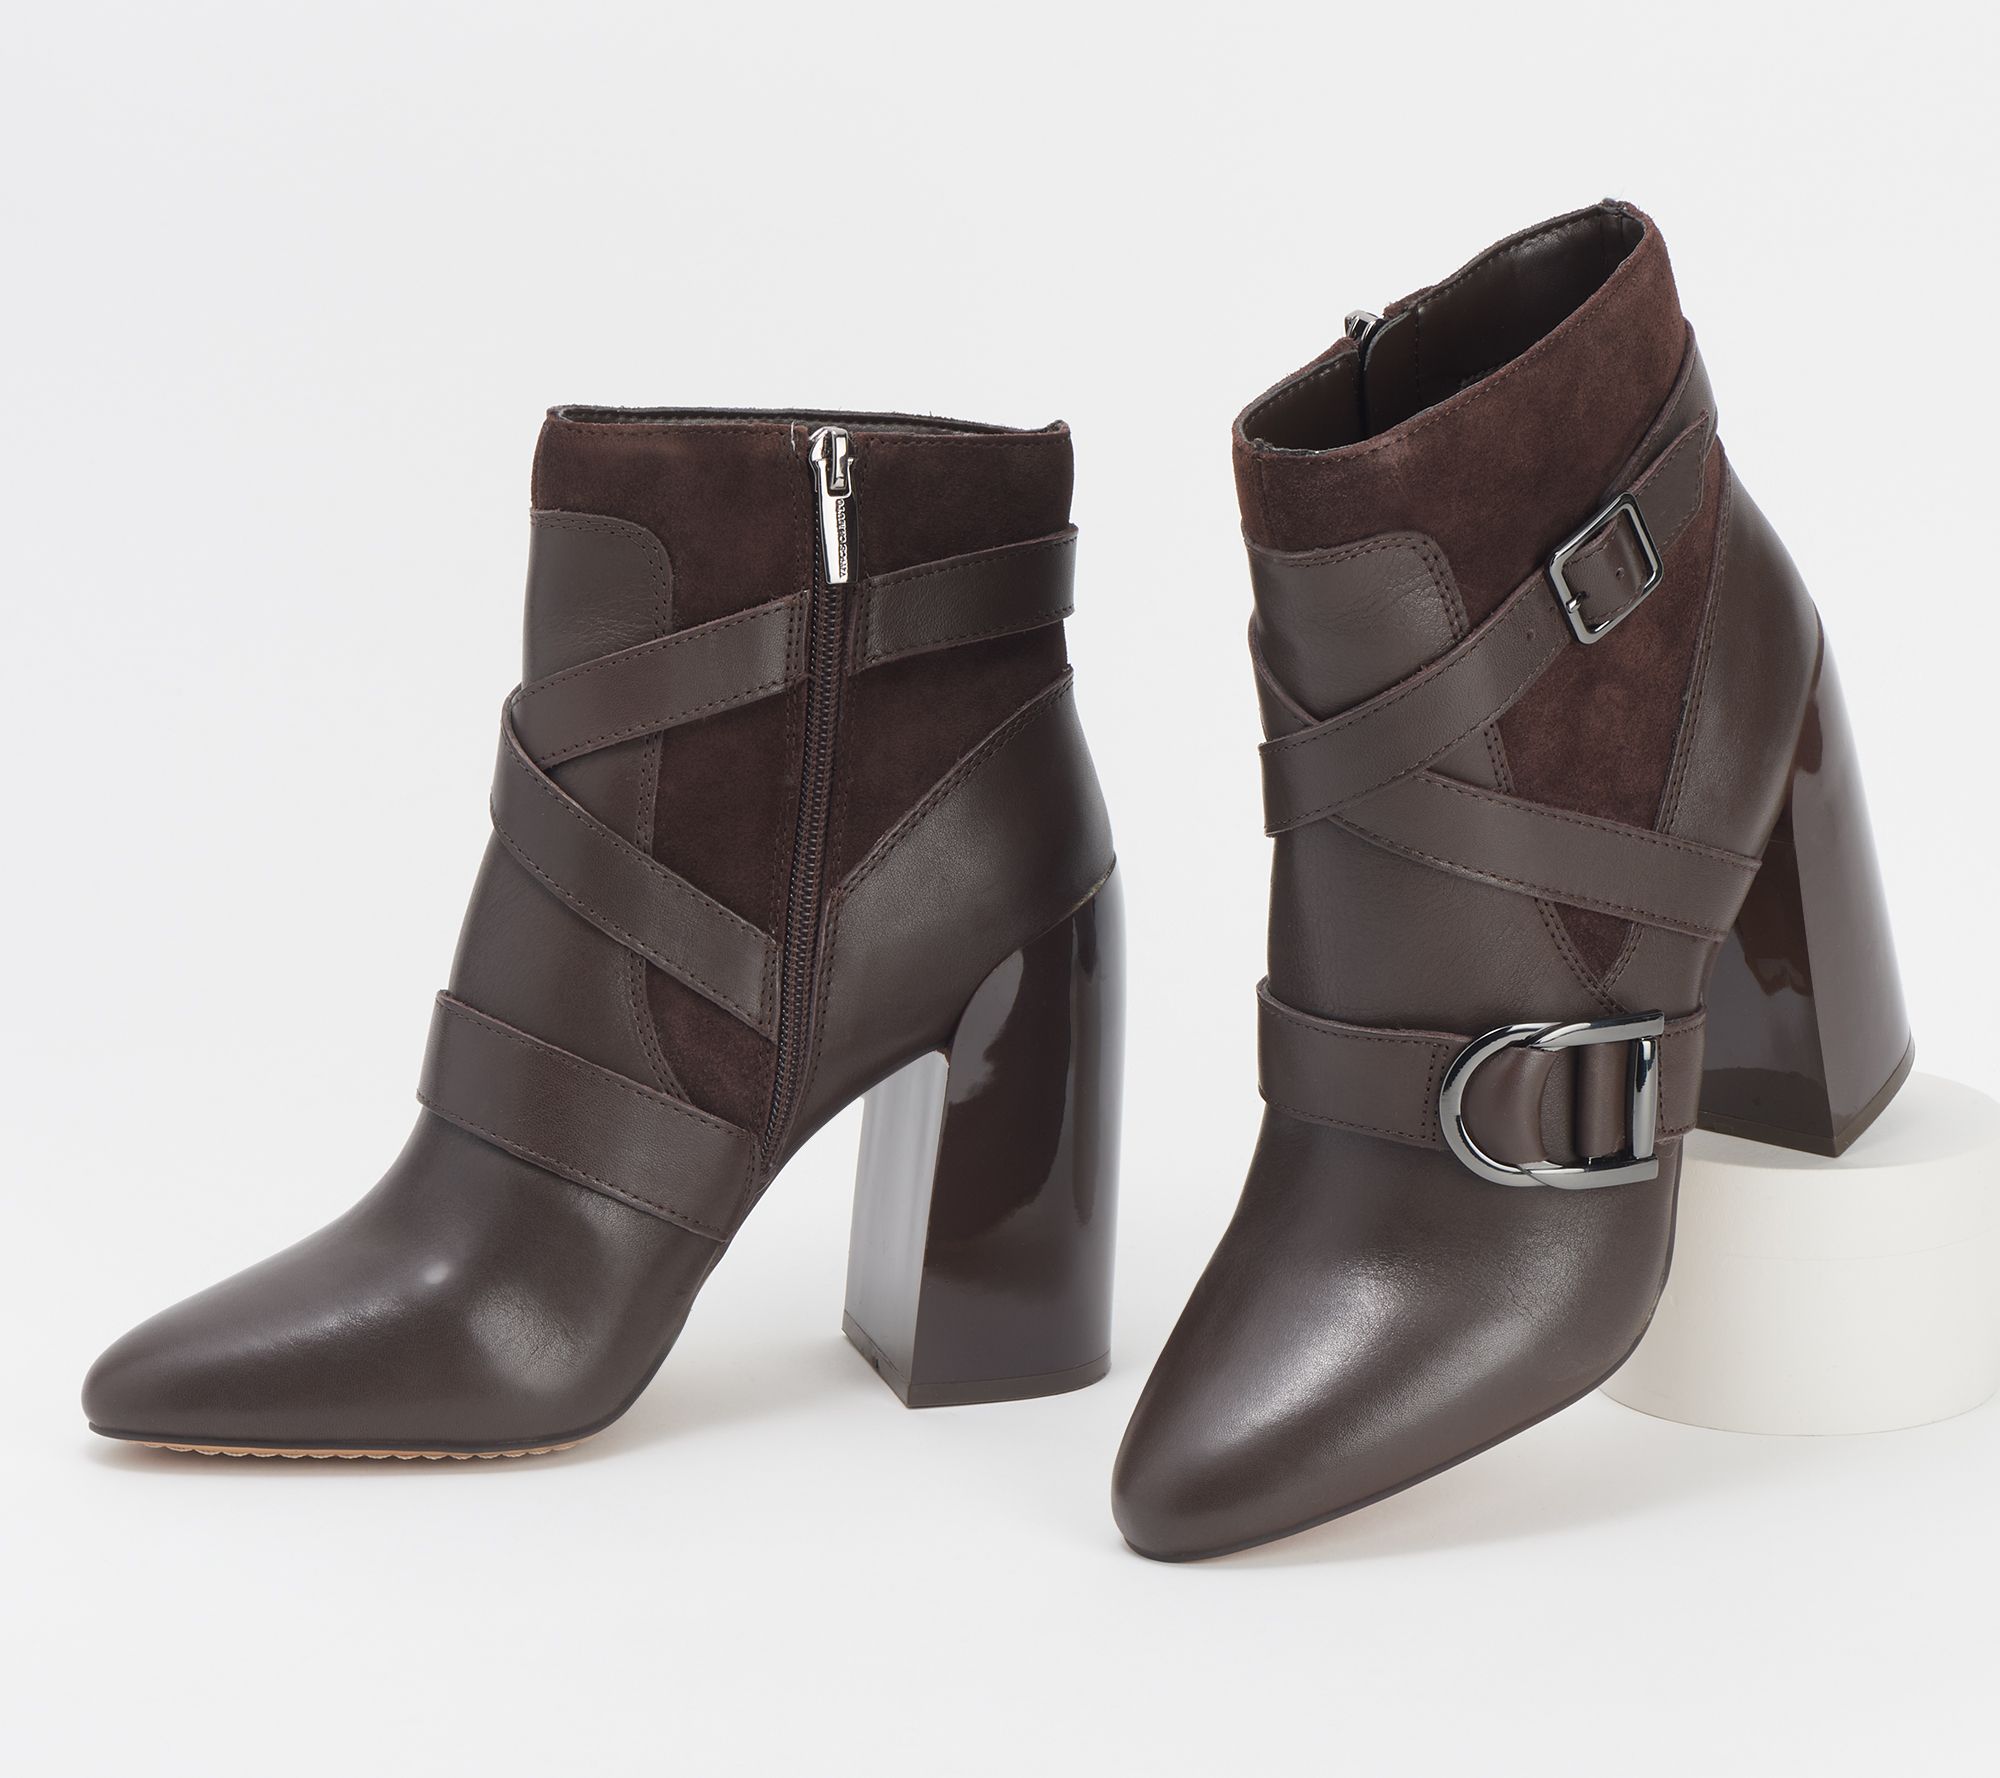 Vince Camuto Leather or Suede Ankle Boots - Okalinra